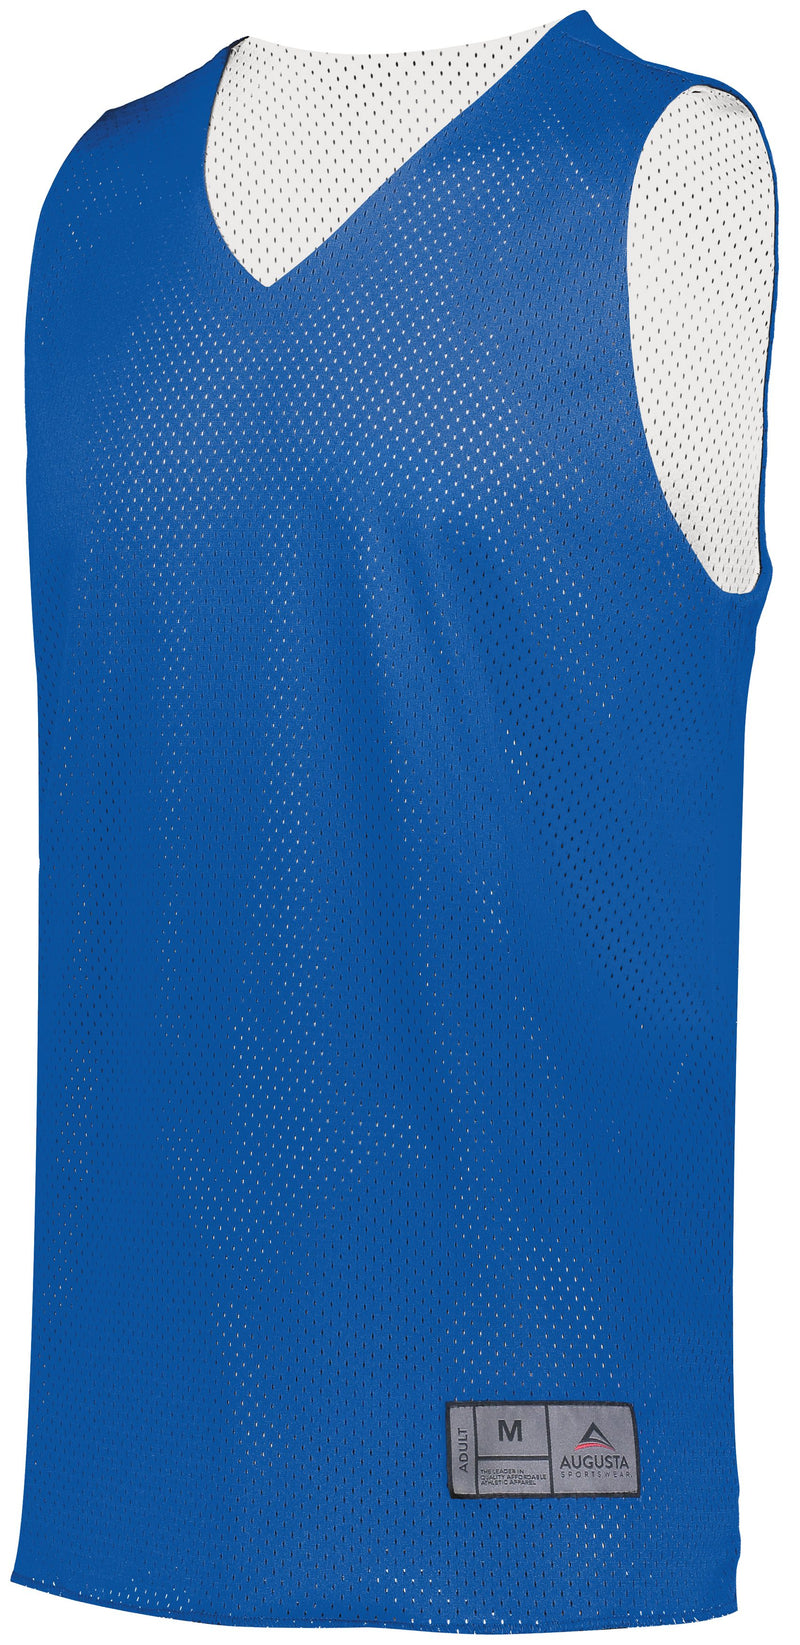 Champro Relief Youth V-Neck Jersey, L / Navy/White/Graphite